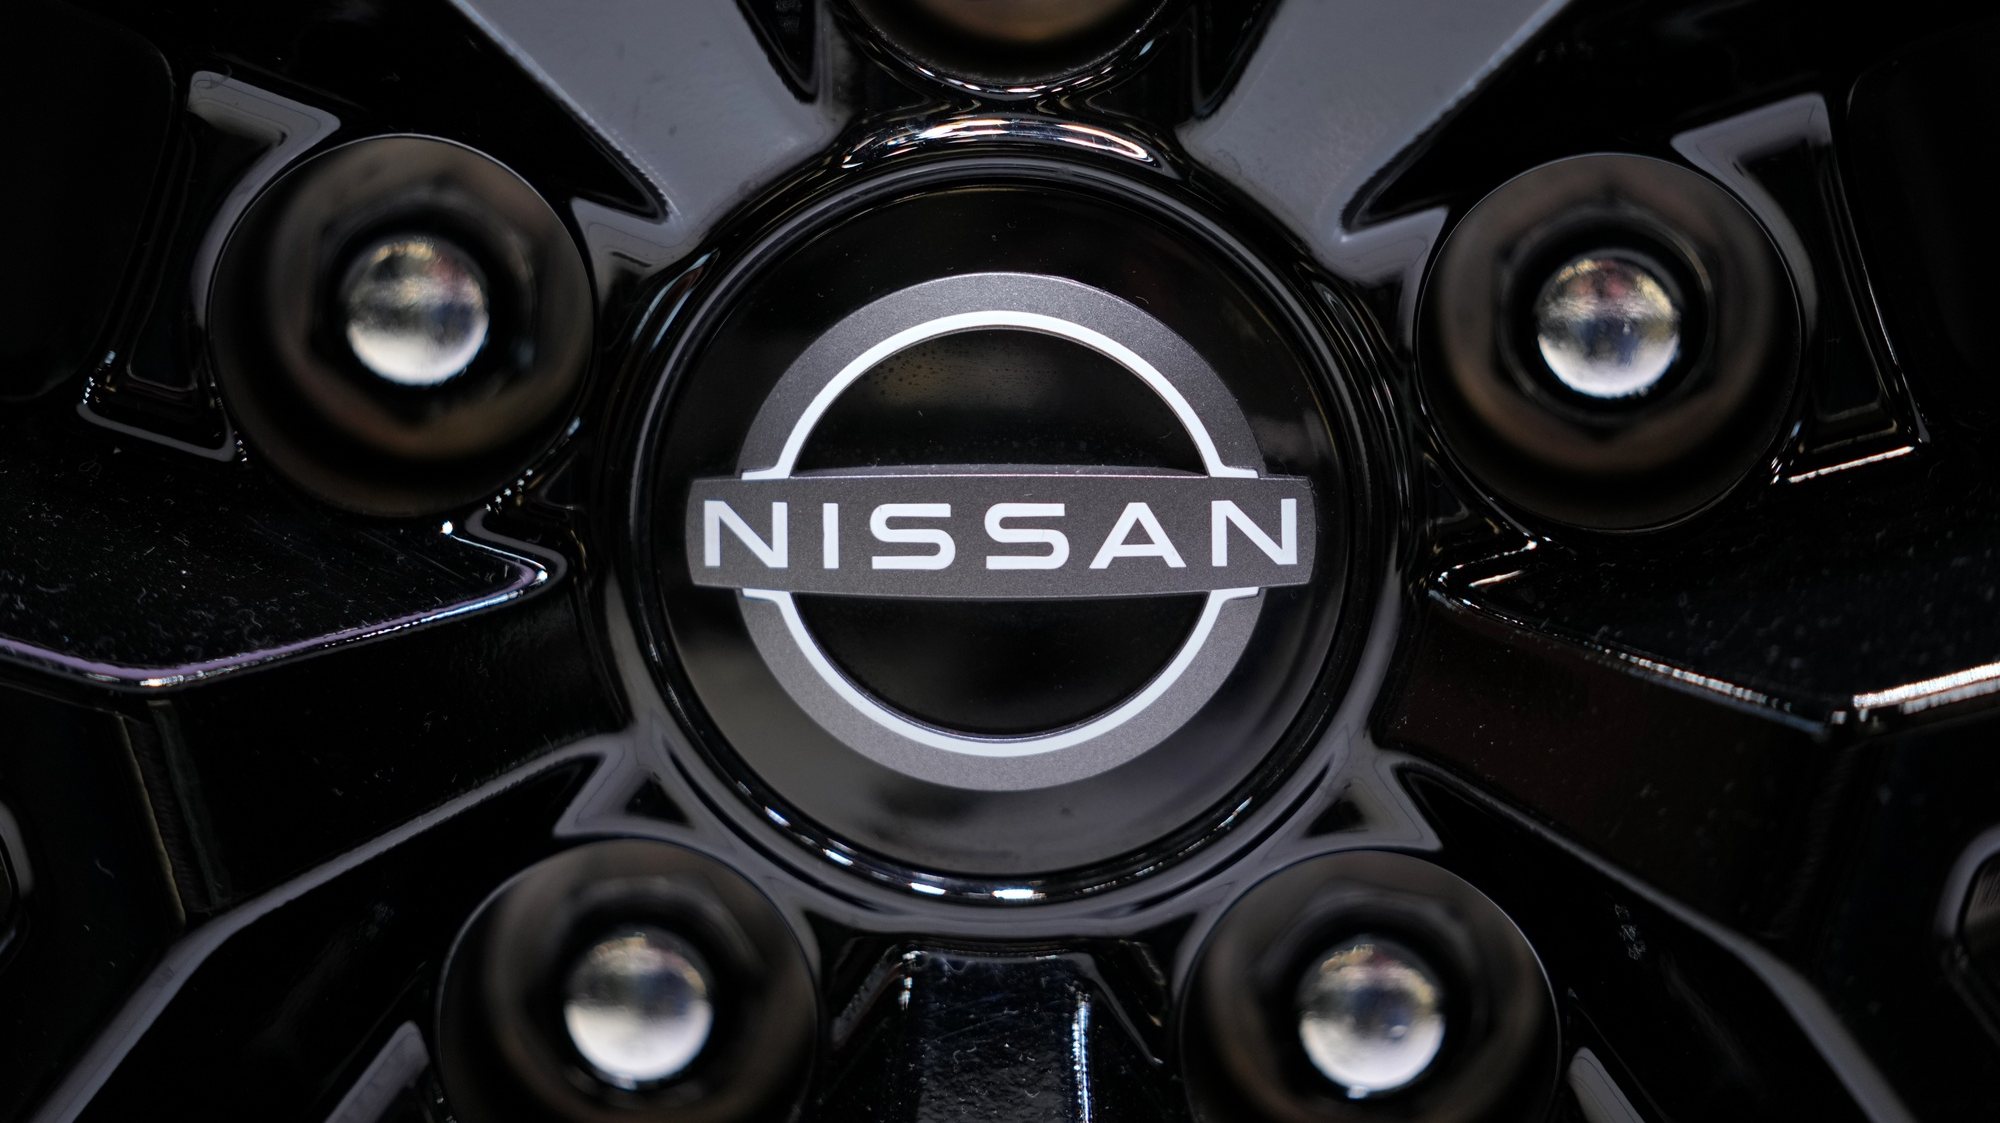 epa11206020 The logo of Nissan Motor Co., Ltd. is seen on a wheel of a car at a showroom in Tokyo, Japan, 08 March 2024. Japan&#039;s Fair Trade Commission announced on 07 March 2024 that it warned Nissan Motor Co., Ltd. over unfair reduction of payments to subcontracting auto parts suppliers. Nissan has unfairly lowered the delivery prices paid to 36 subcontractors for the production of passenger car parts, violating the Subcontract Act. The total reduction amounted to about three billion yen (around 20.28 million US dollar), making it the highest amount ever for a violation recommendation based on the law.  EPA/KIMIMASA MAYAMA